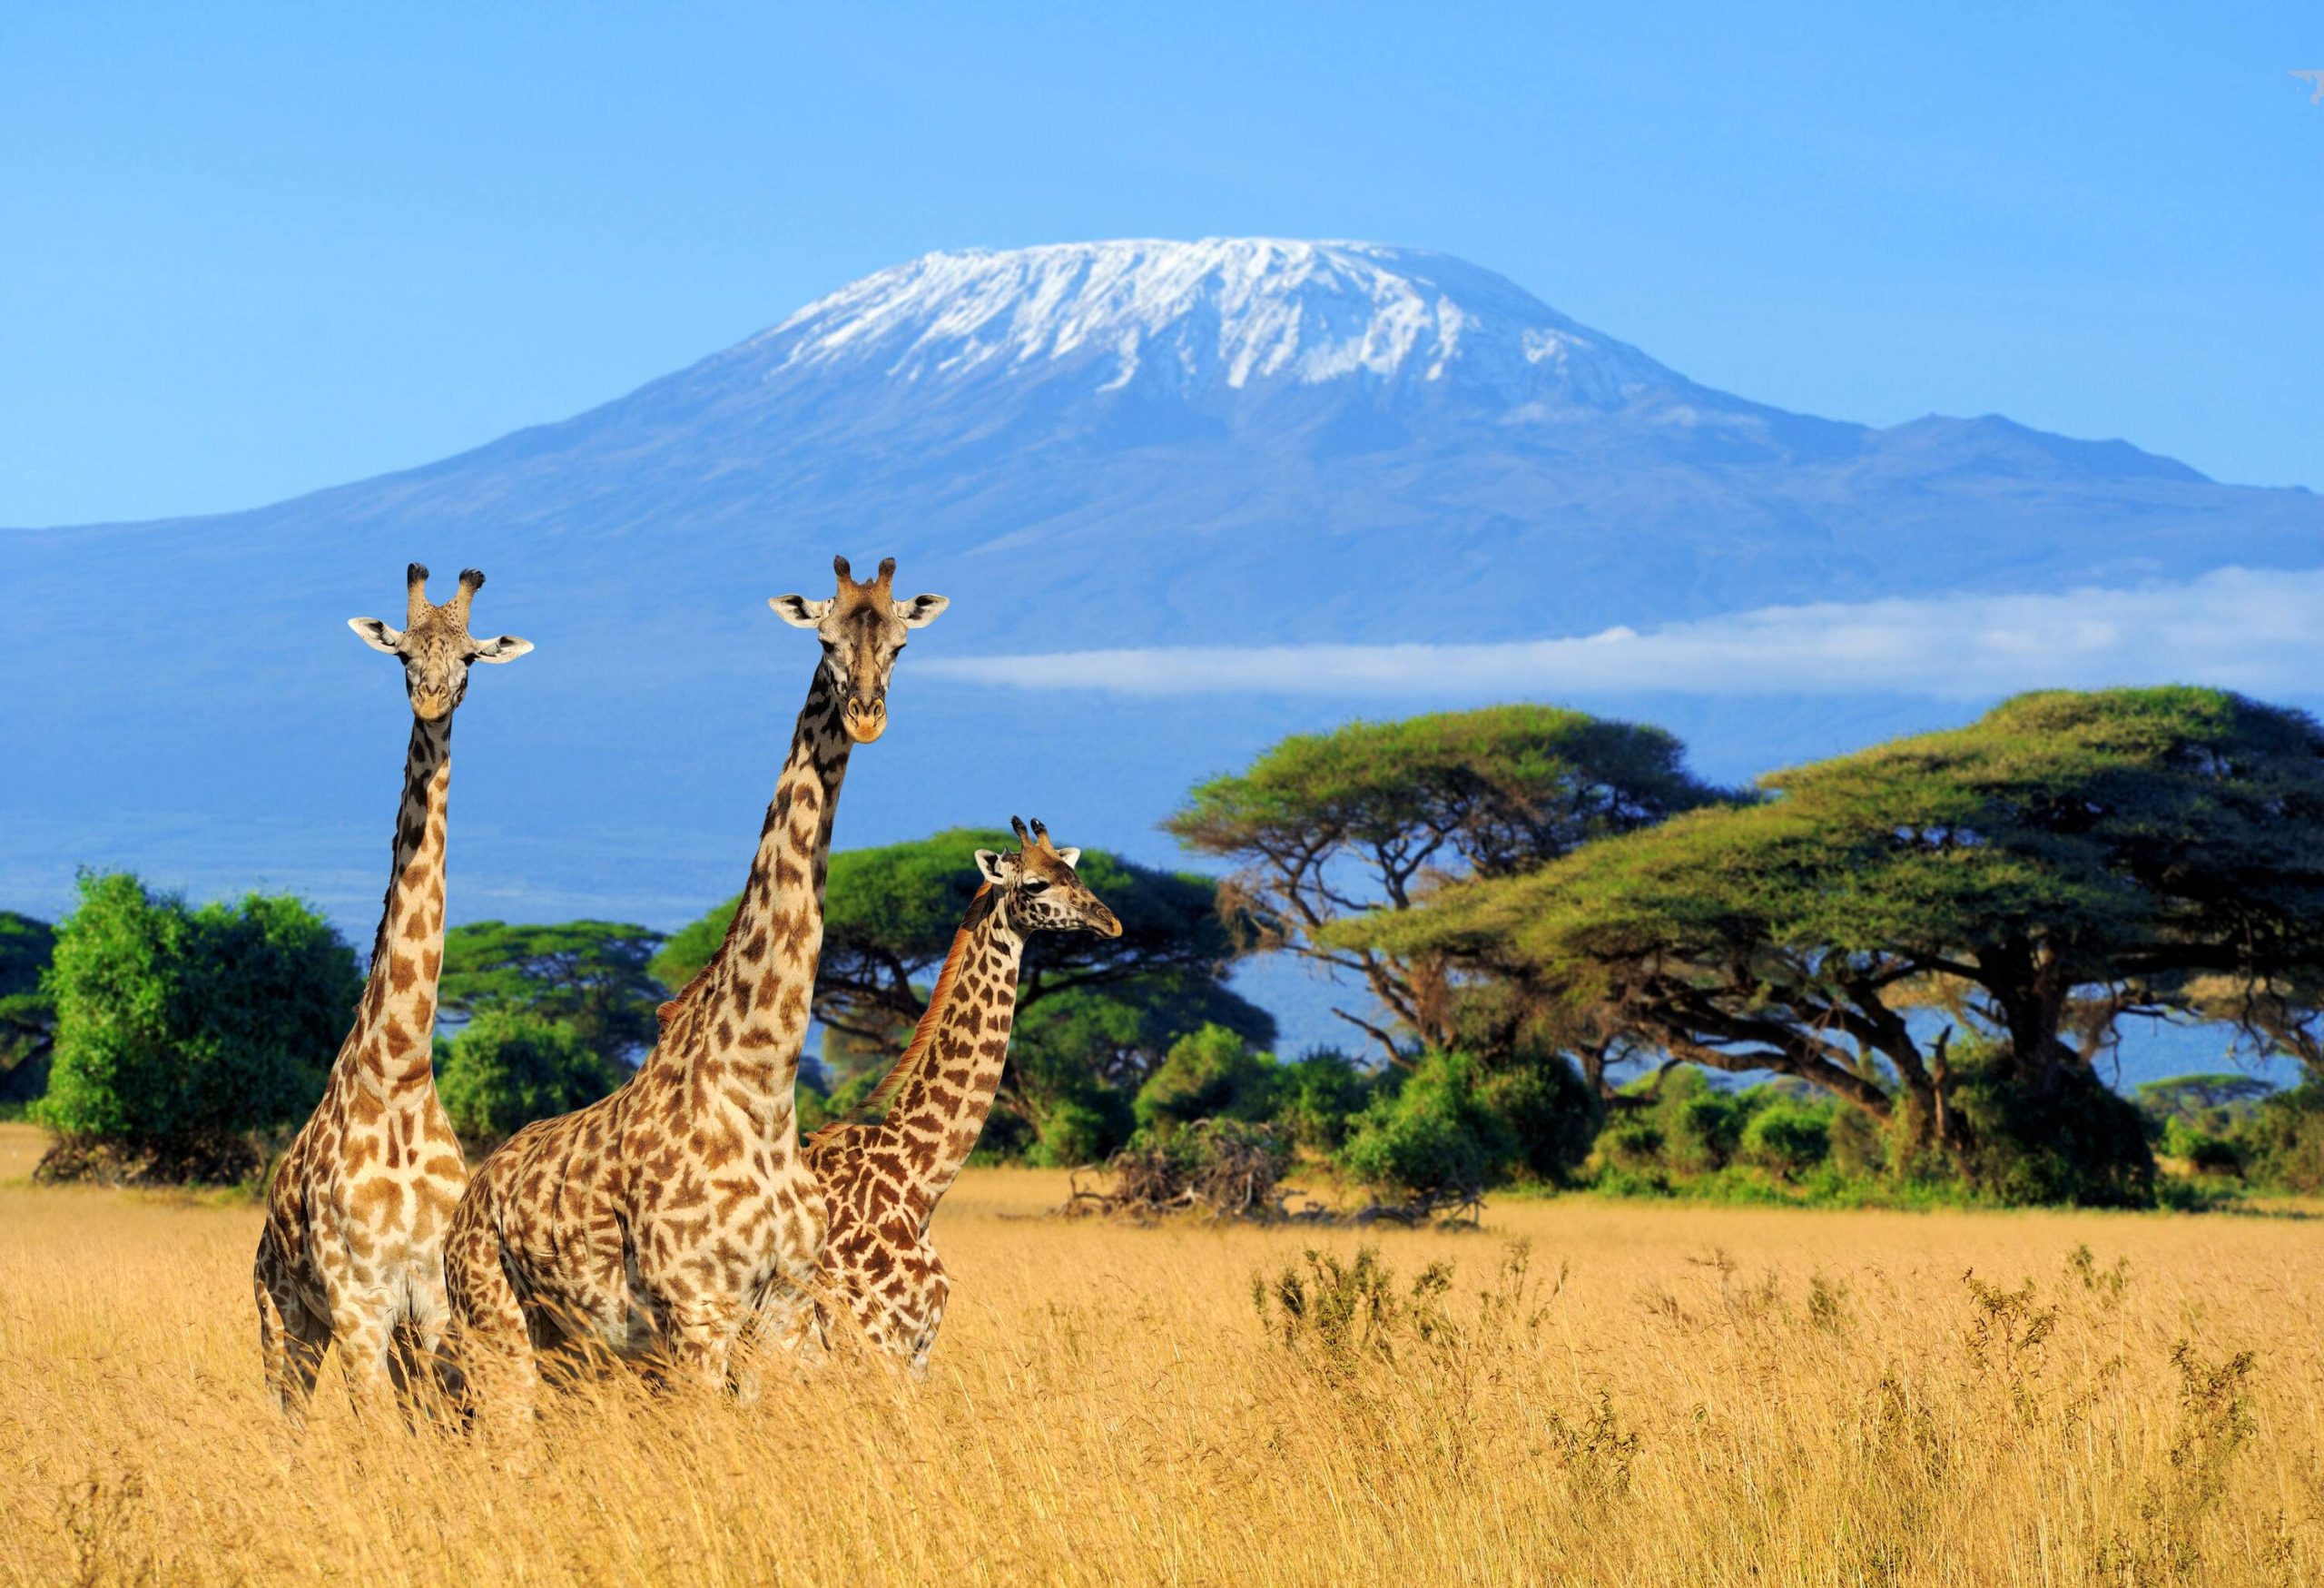 Three giraffes in the wild with tall green trees and a snow-dusted mountain in the background.